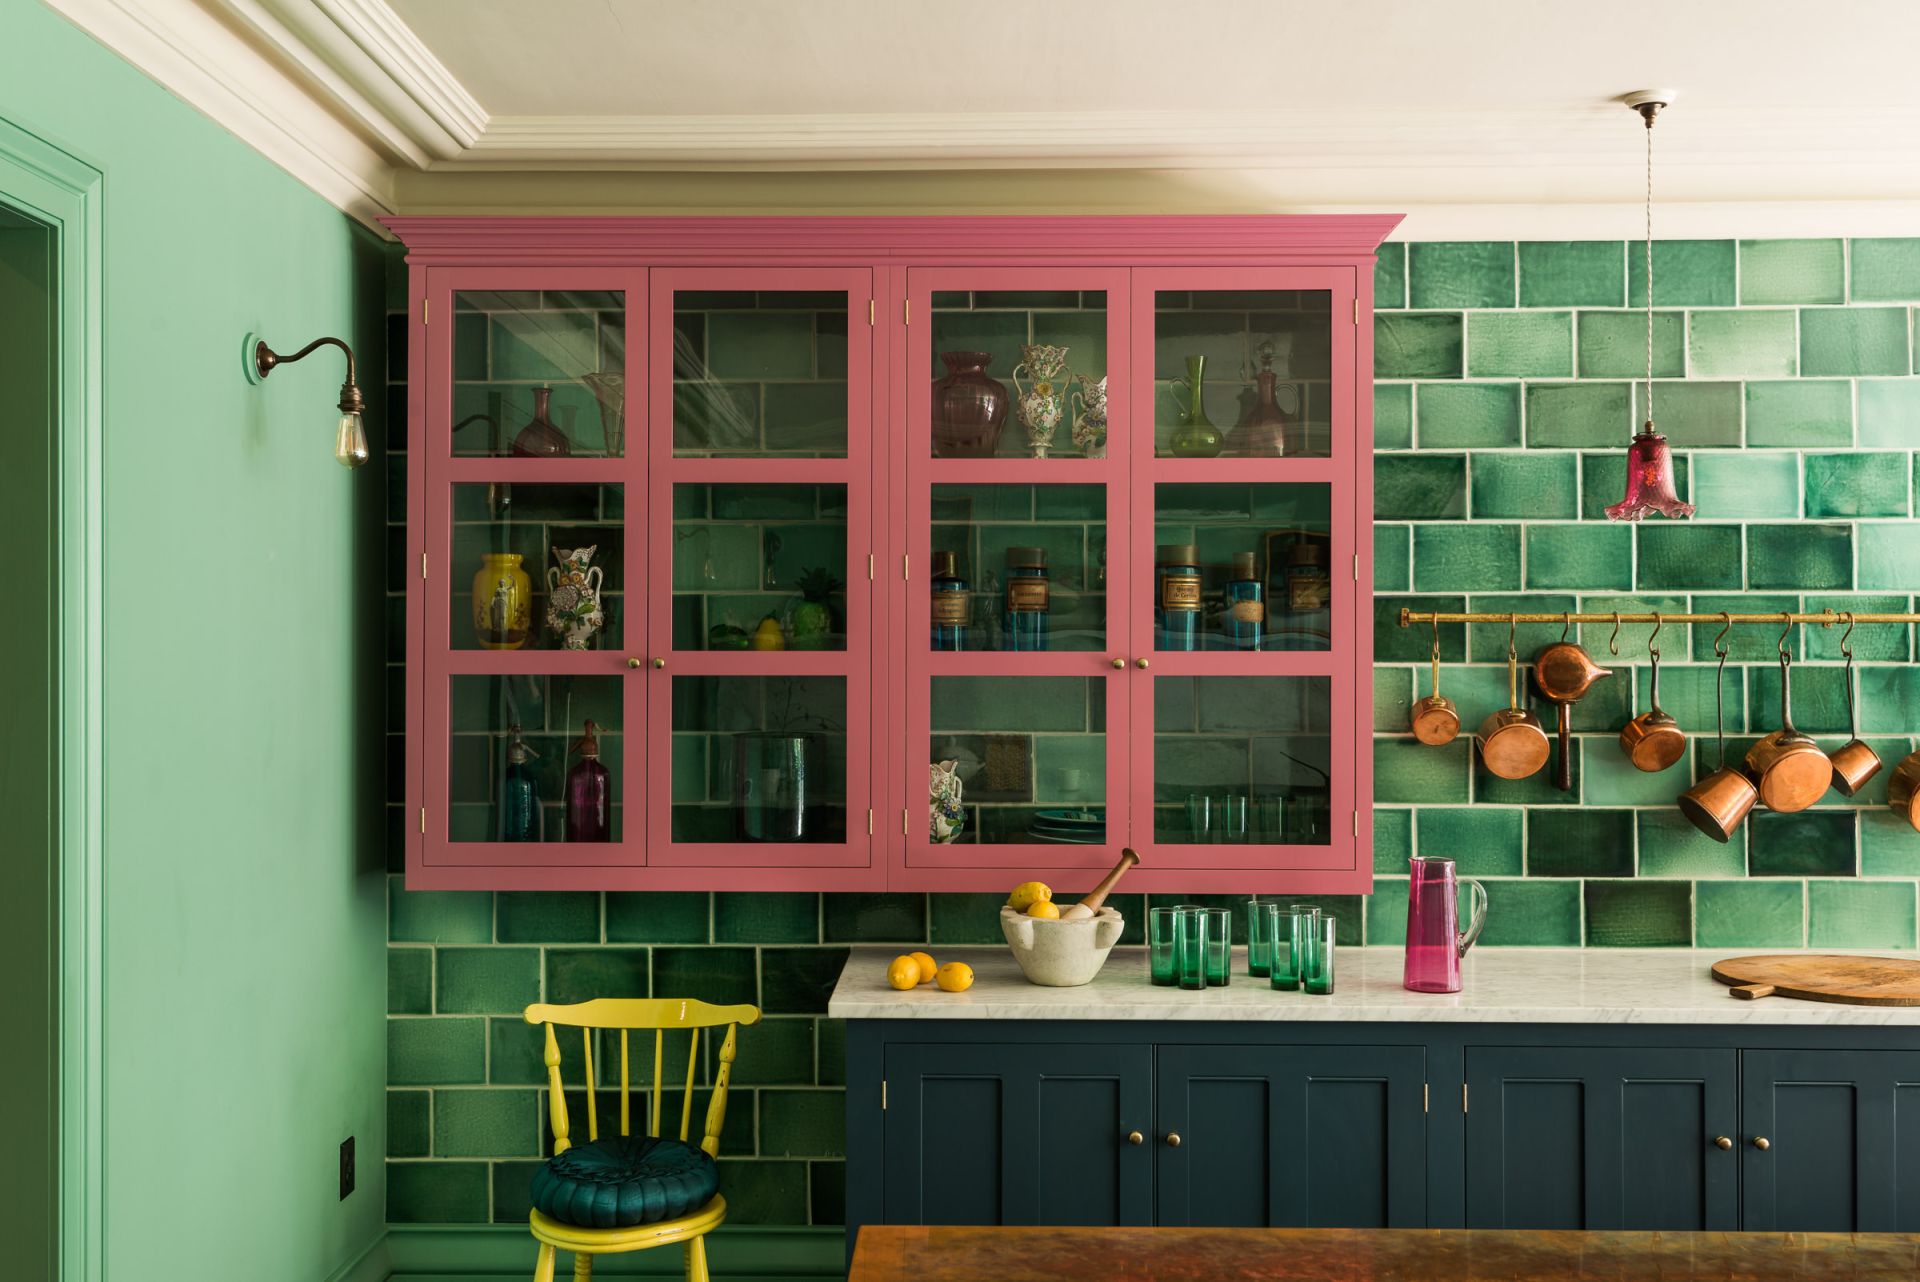 Kitchen wall tile ideas – bring color, pattern and style to vertical ...